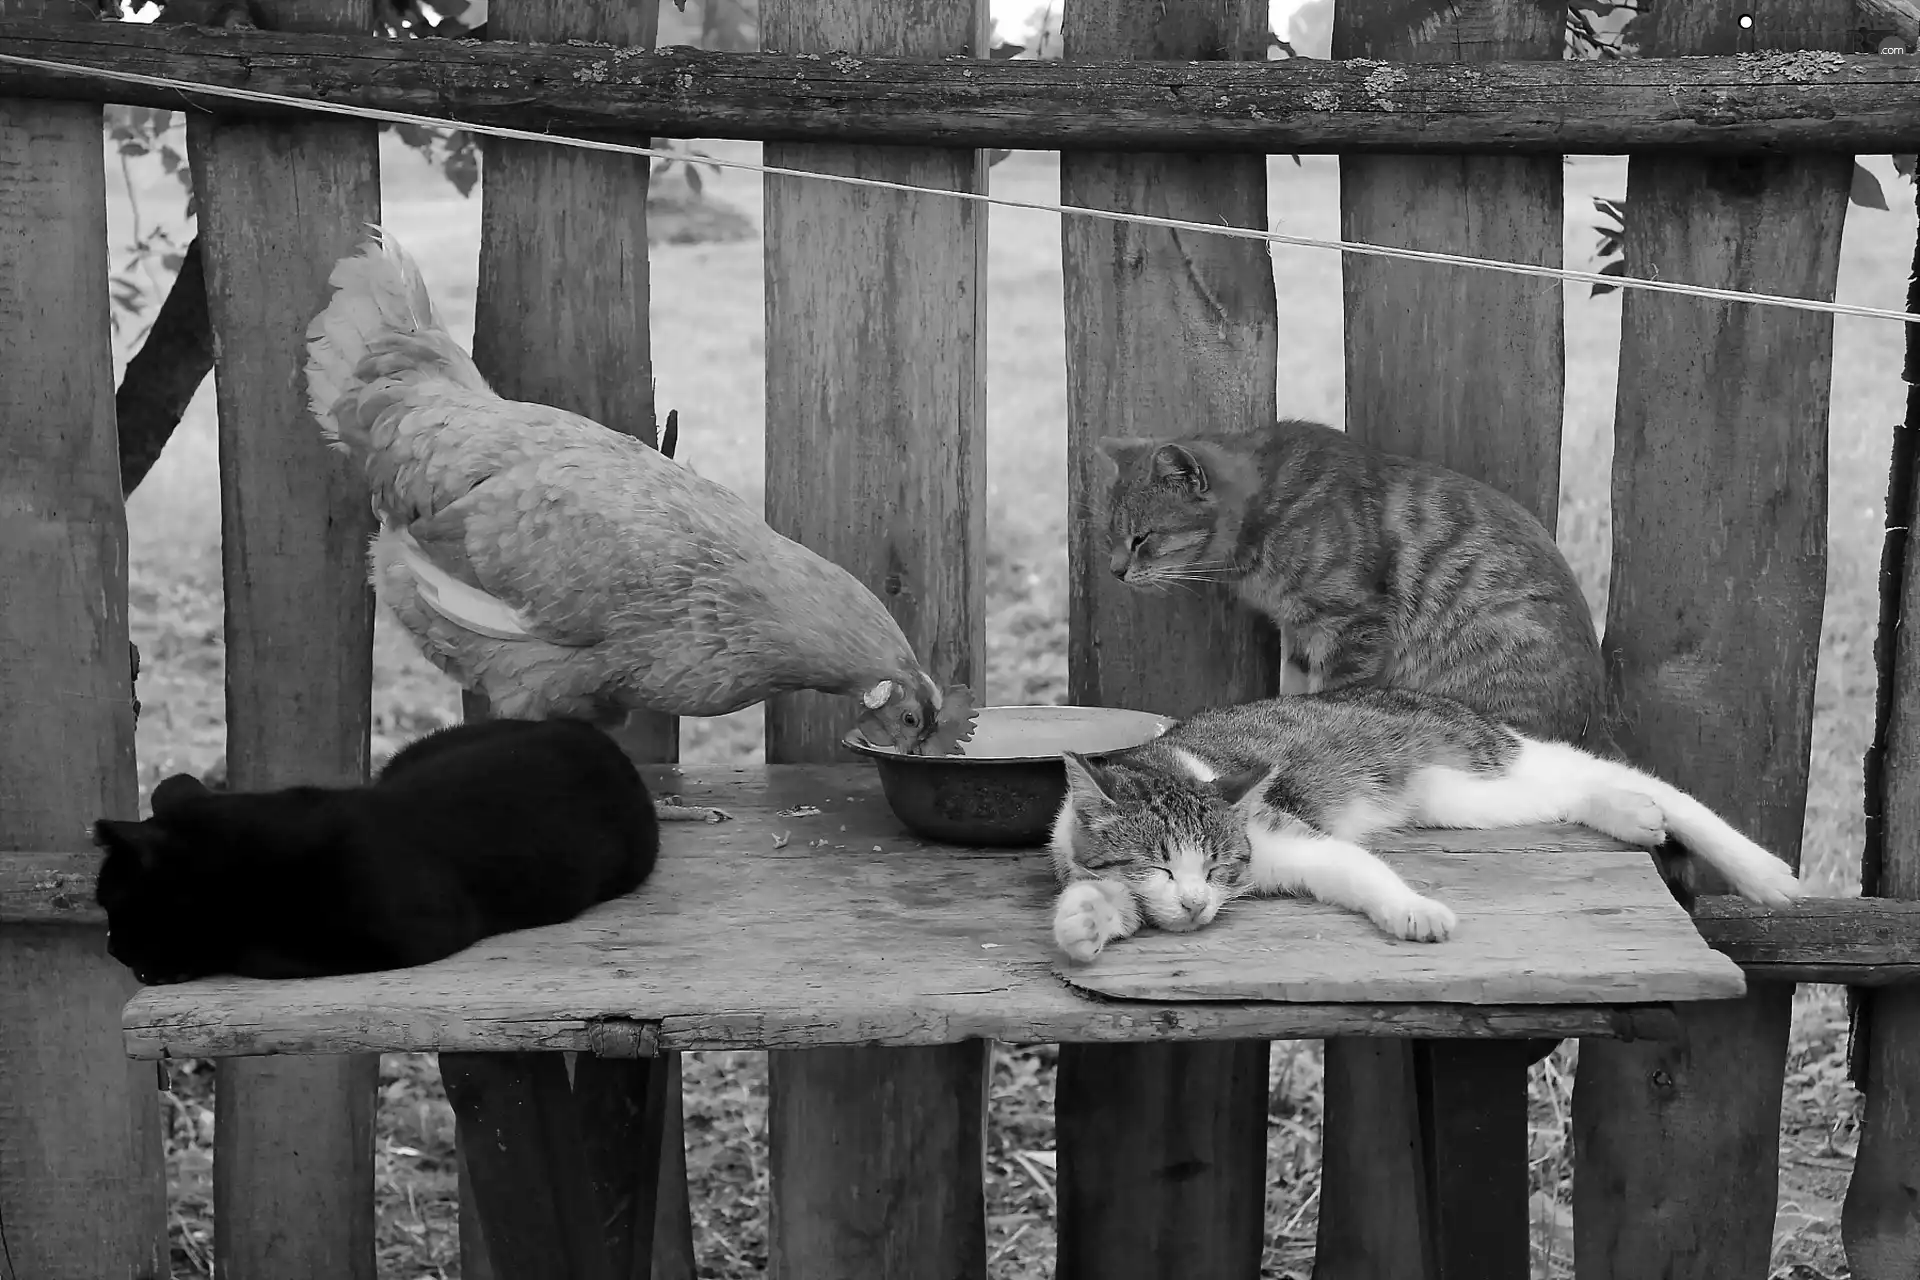 Fence, chicken, cats